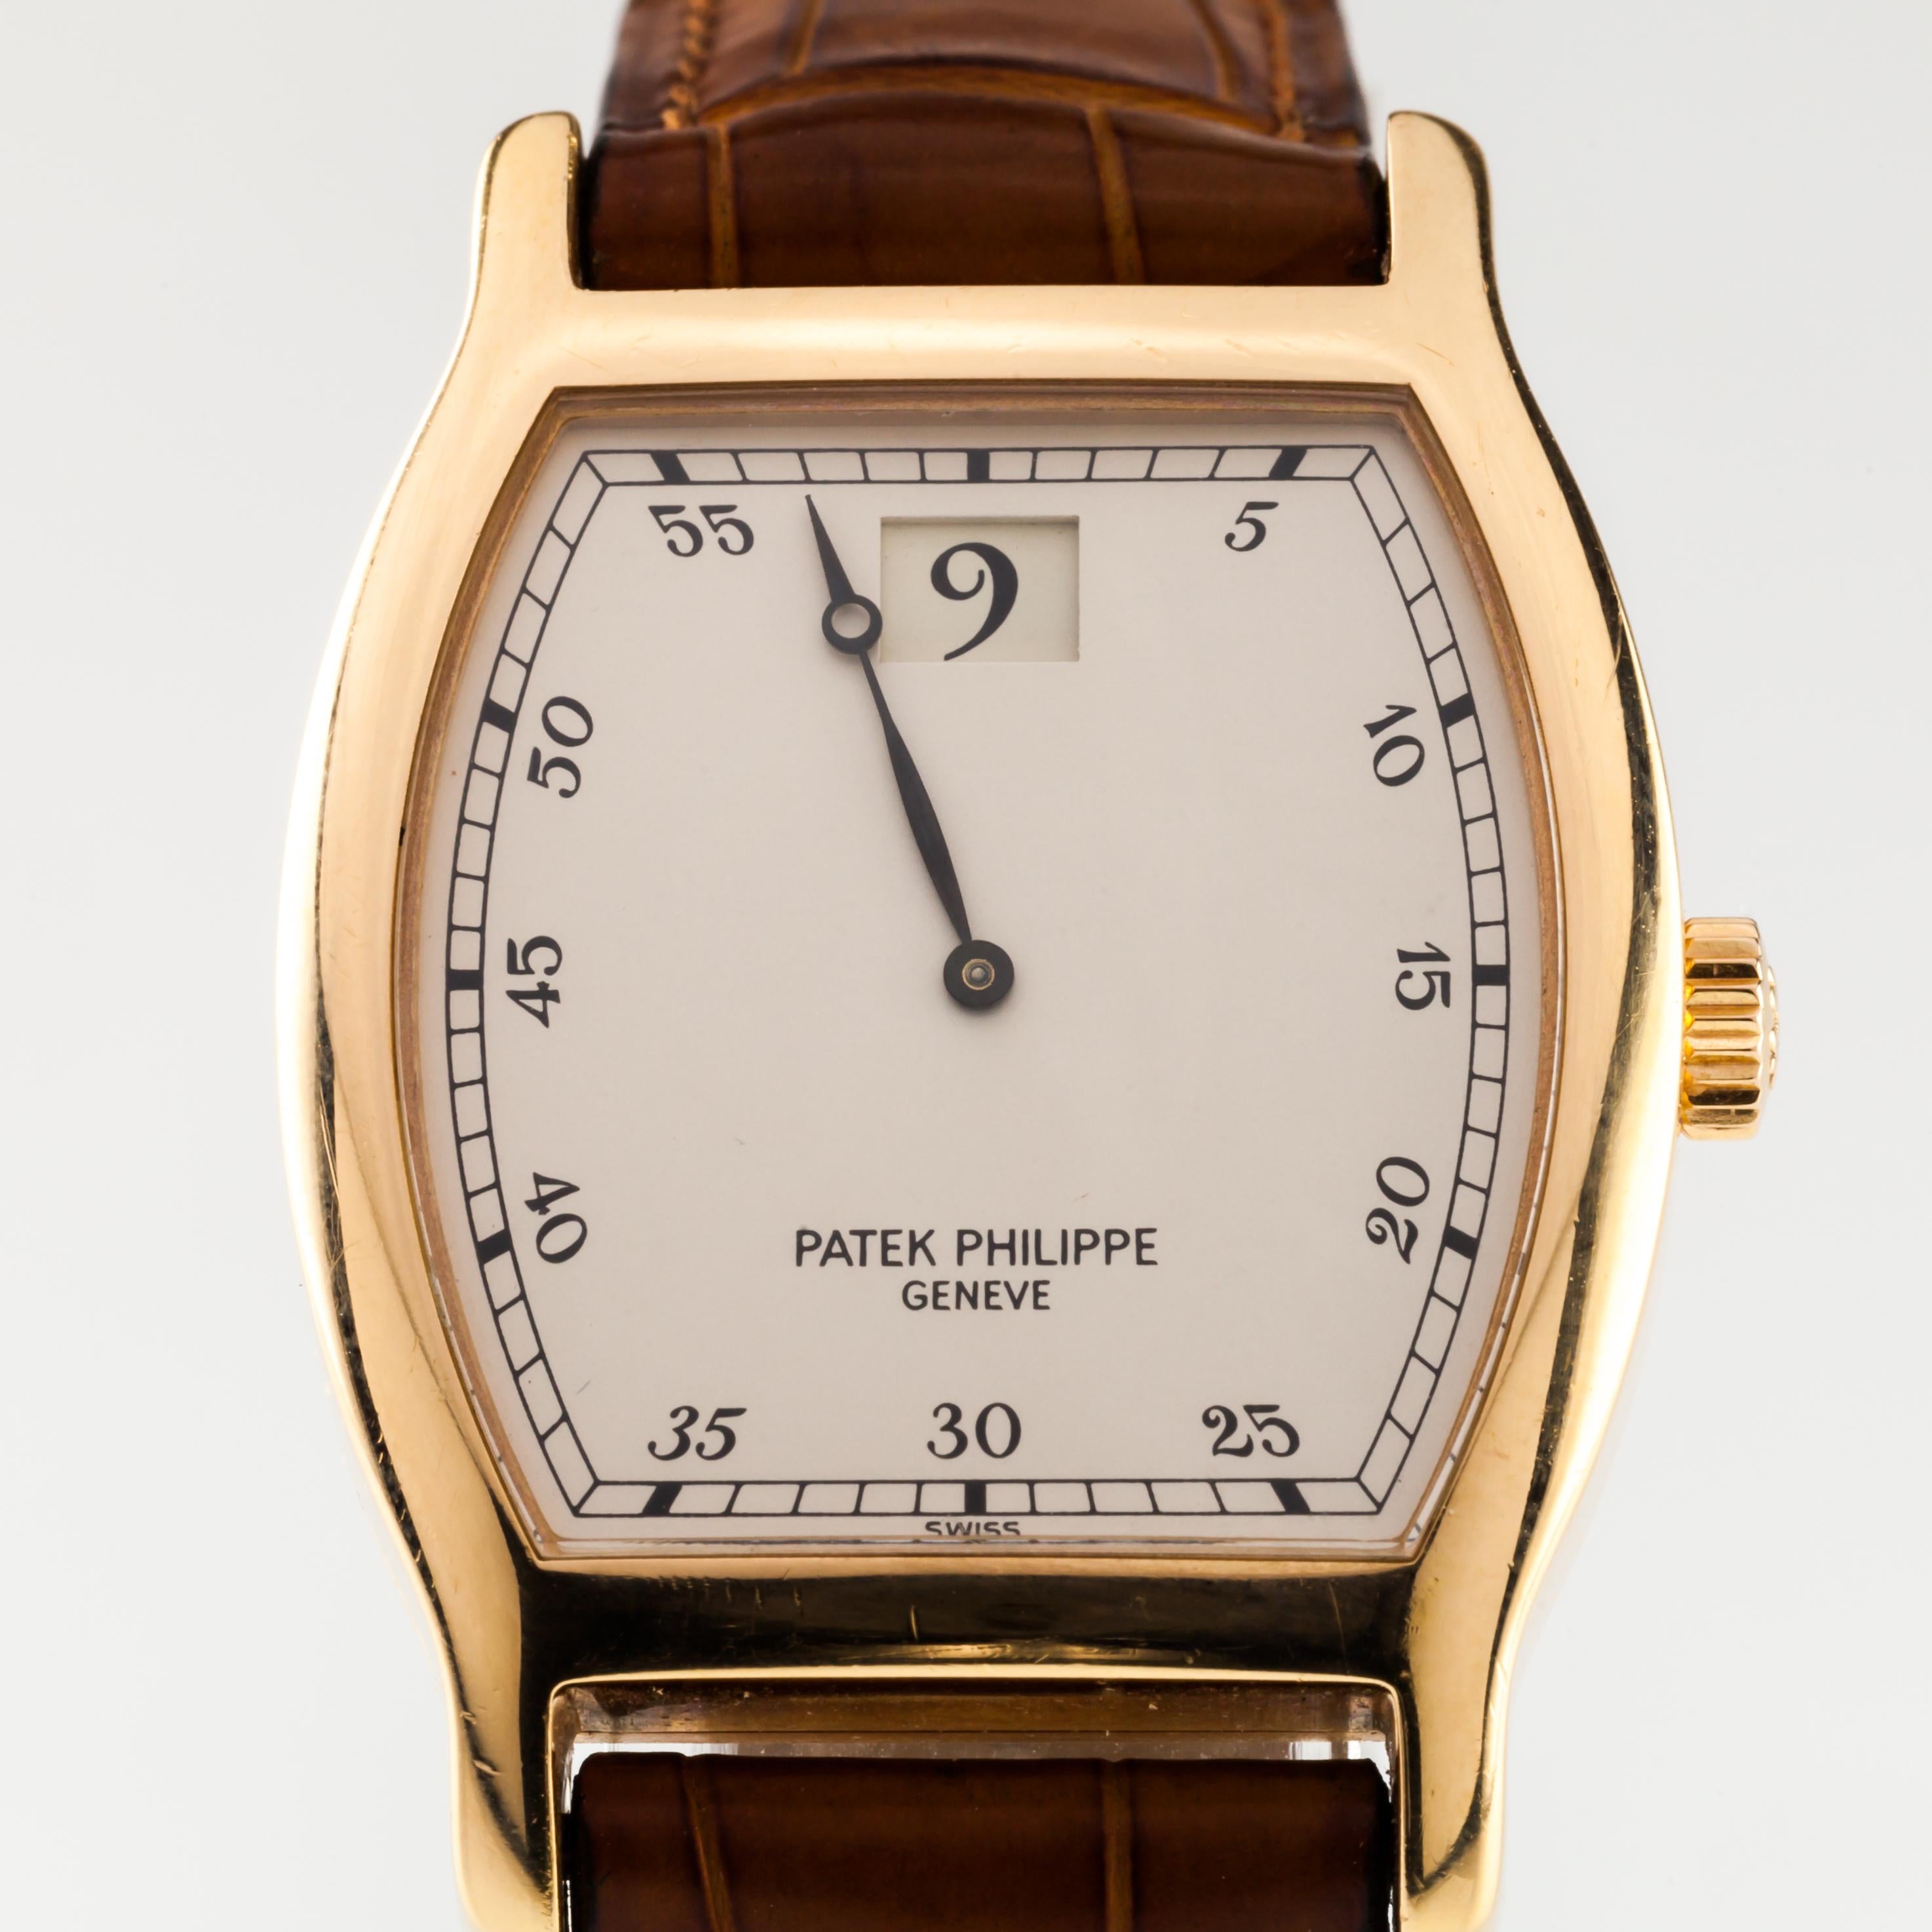 Model #3969R
Case #752913
Originally issued to commemorate Patek Philippe's 150th Anniversary, recreating its original Jumping Hour tonneau design. 450 were manufactured in 18k Rose Gold. Amazing Collectible Watch!

18k Rose Gold Tonneau Shaped